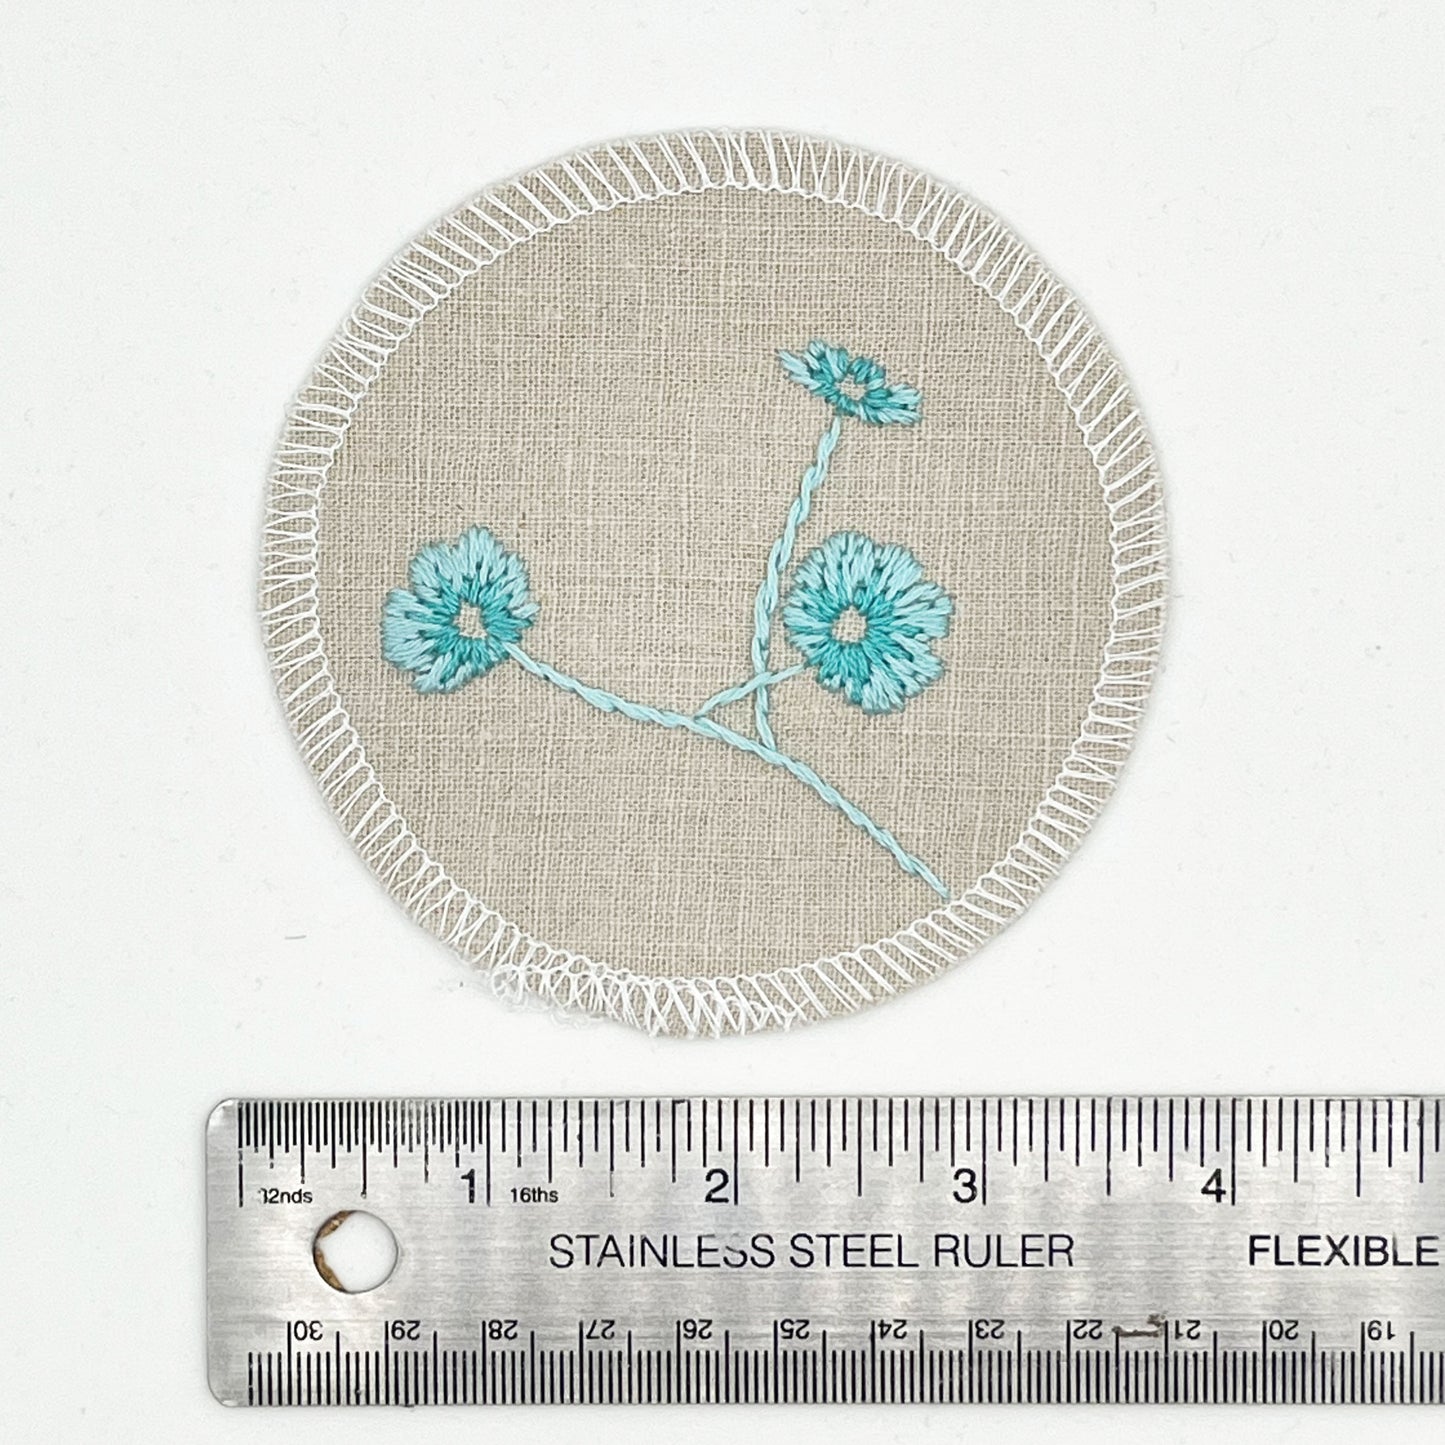 a patch made from a natural color cotton linen fabric placed next to a ruler, showing a diameter of 4 inches, hand embroidered with 3 poppies in shades of robin's egg blue, edges overlocked with white thread, on a white background